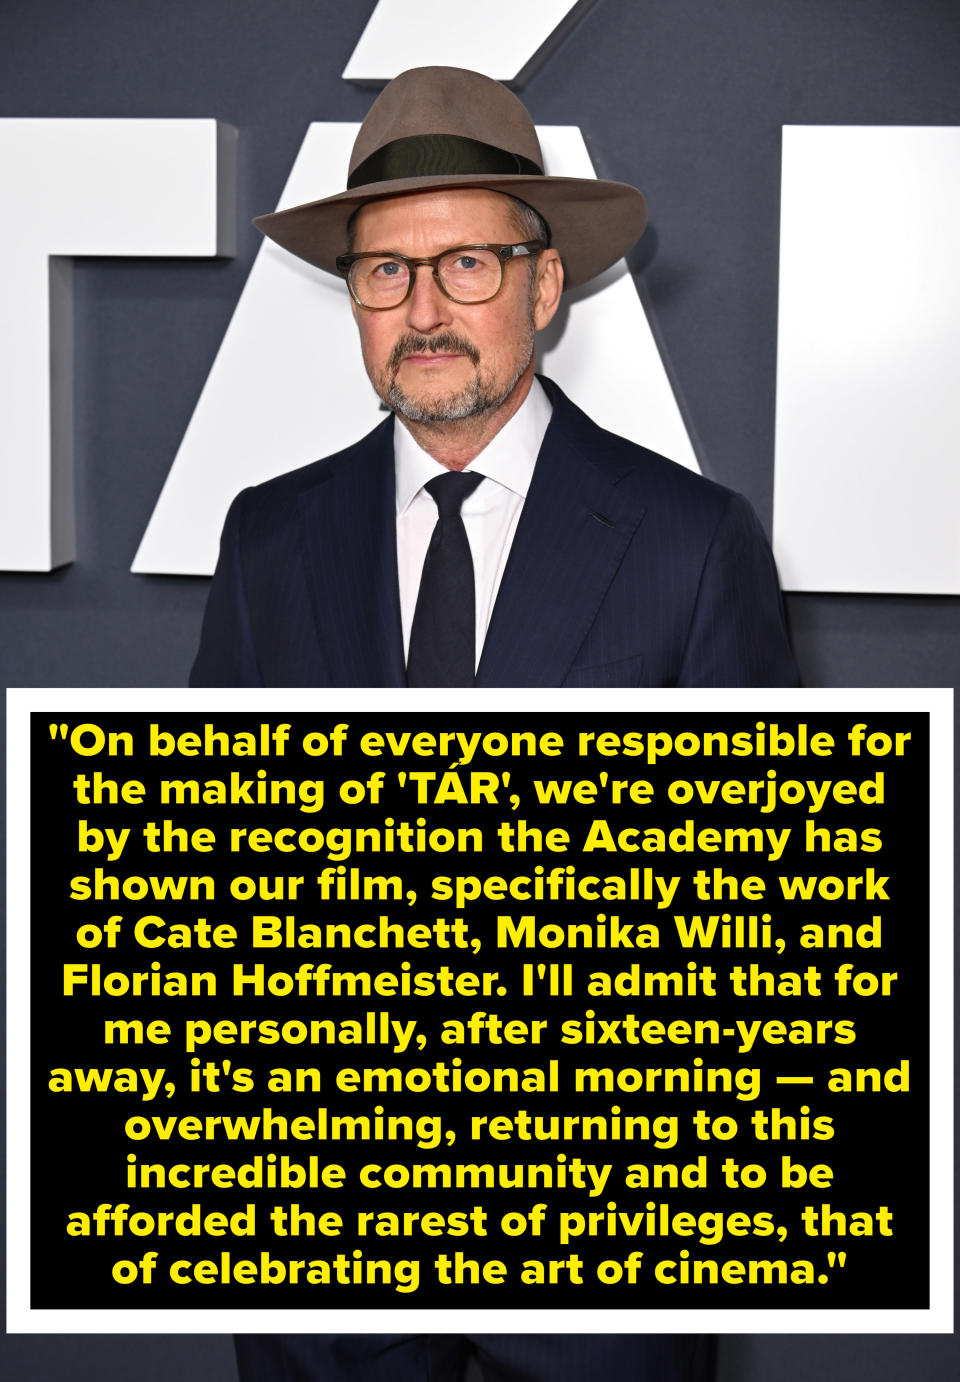 &quot;On behalf of everyone&nbsp; responsible for the making of&nbsp;Tár, we're overjoyed by the recognition the Academy has shown our film, specifically the work of Cate Blanchett, Monika Willi, and Florian Hoffmeister&quot;